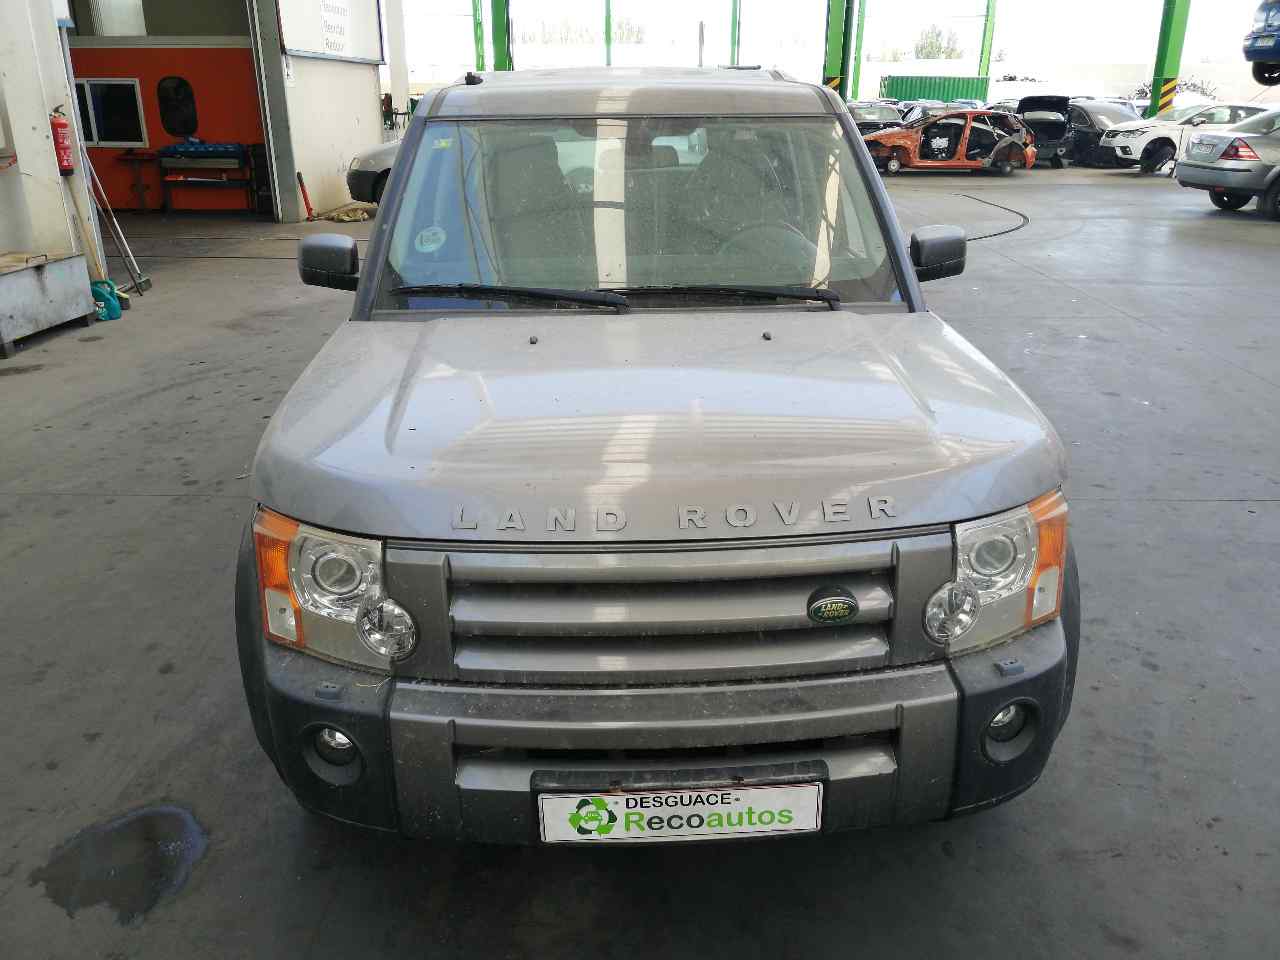 LAND ROVER Discovery 4 generation (2009-2016) Other Control Units SR0500140, 0265005654 19818838